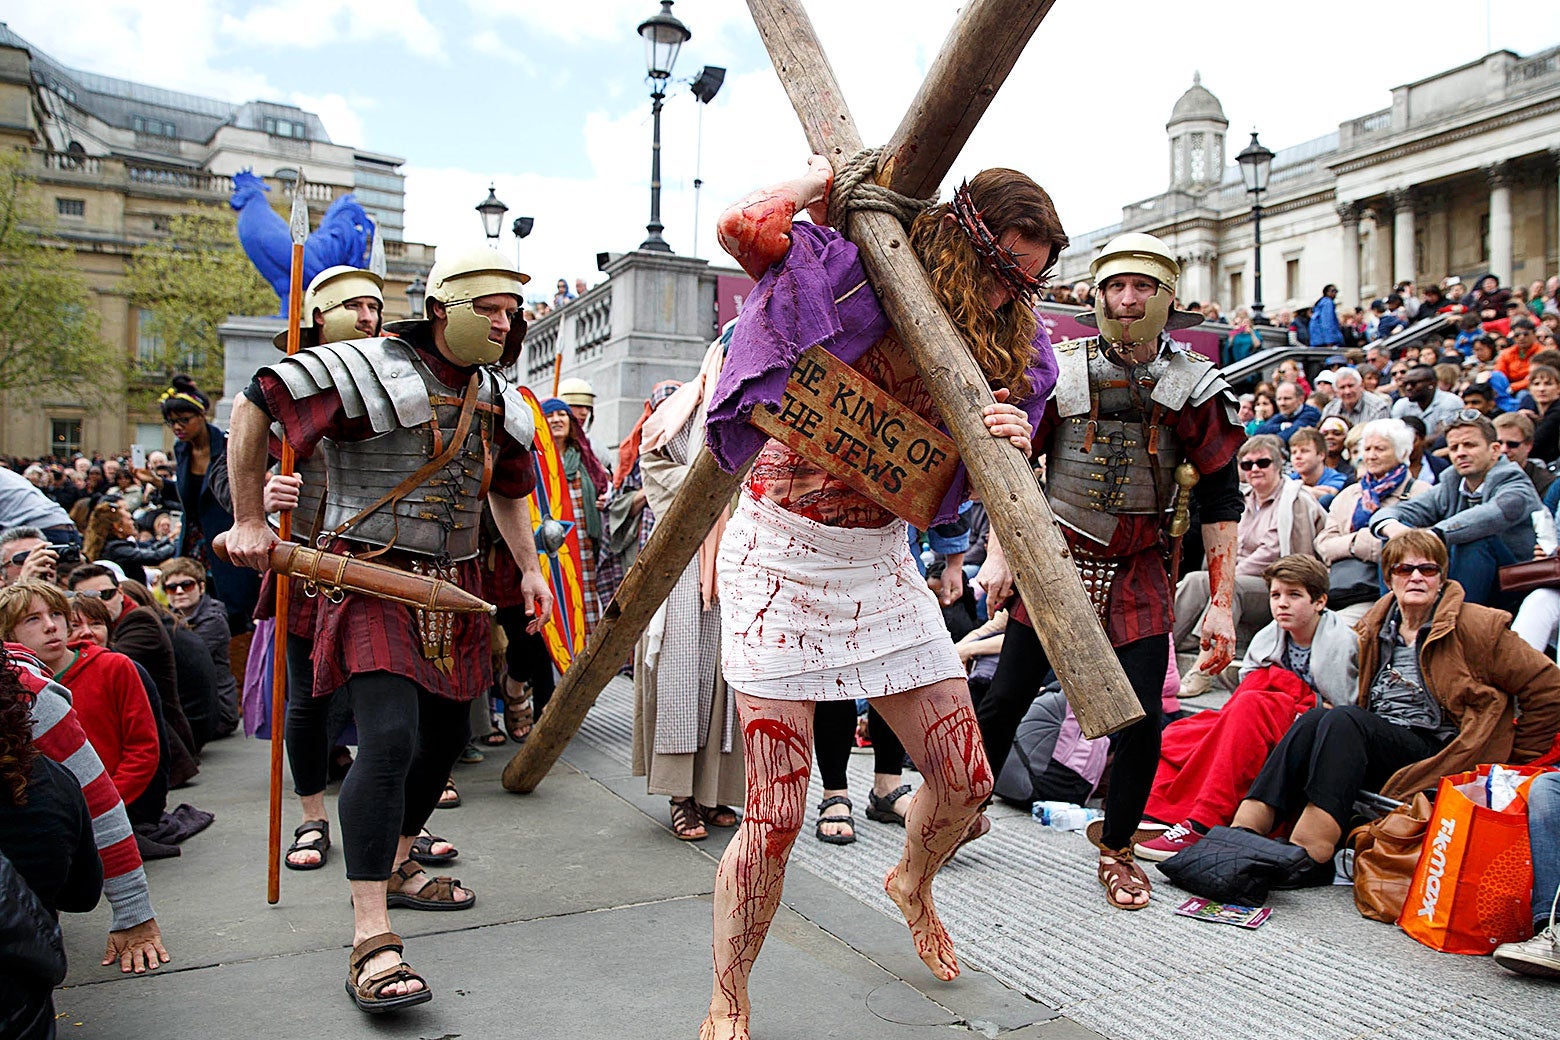 Actors perform The Passion of Jesus in Trafalgar Square on April 18, 2014 in London, England.